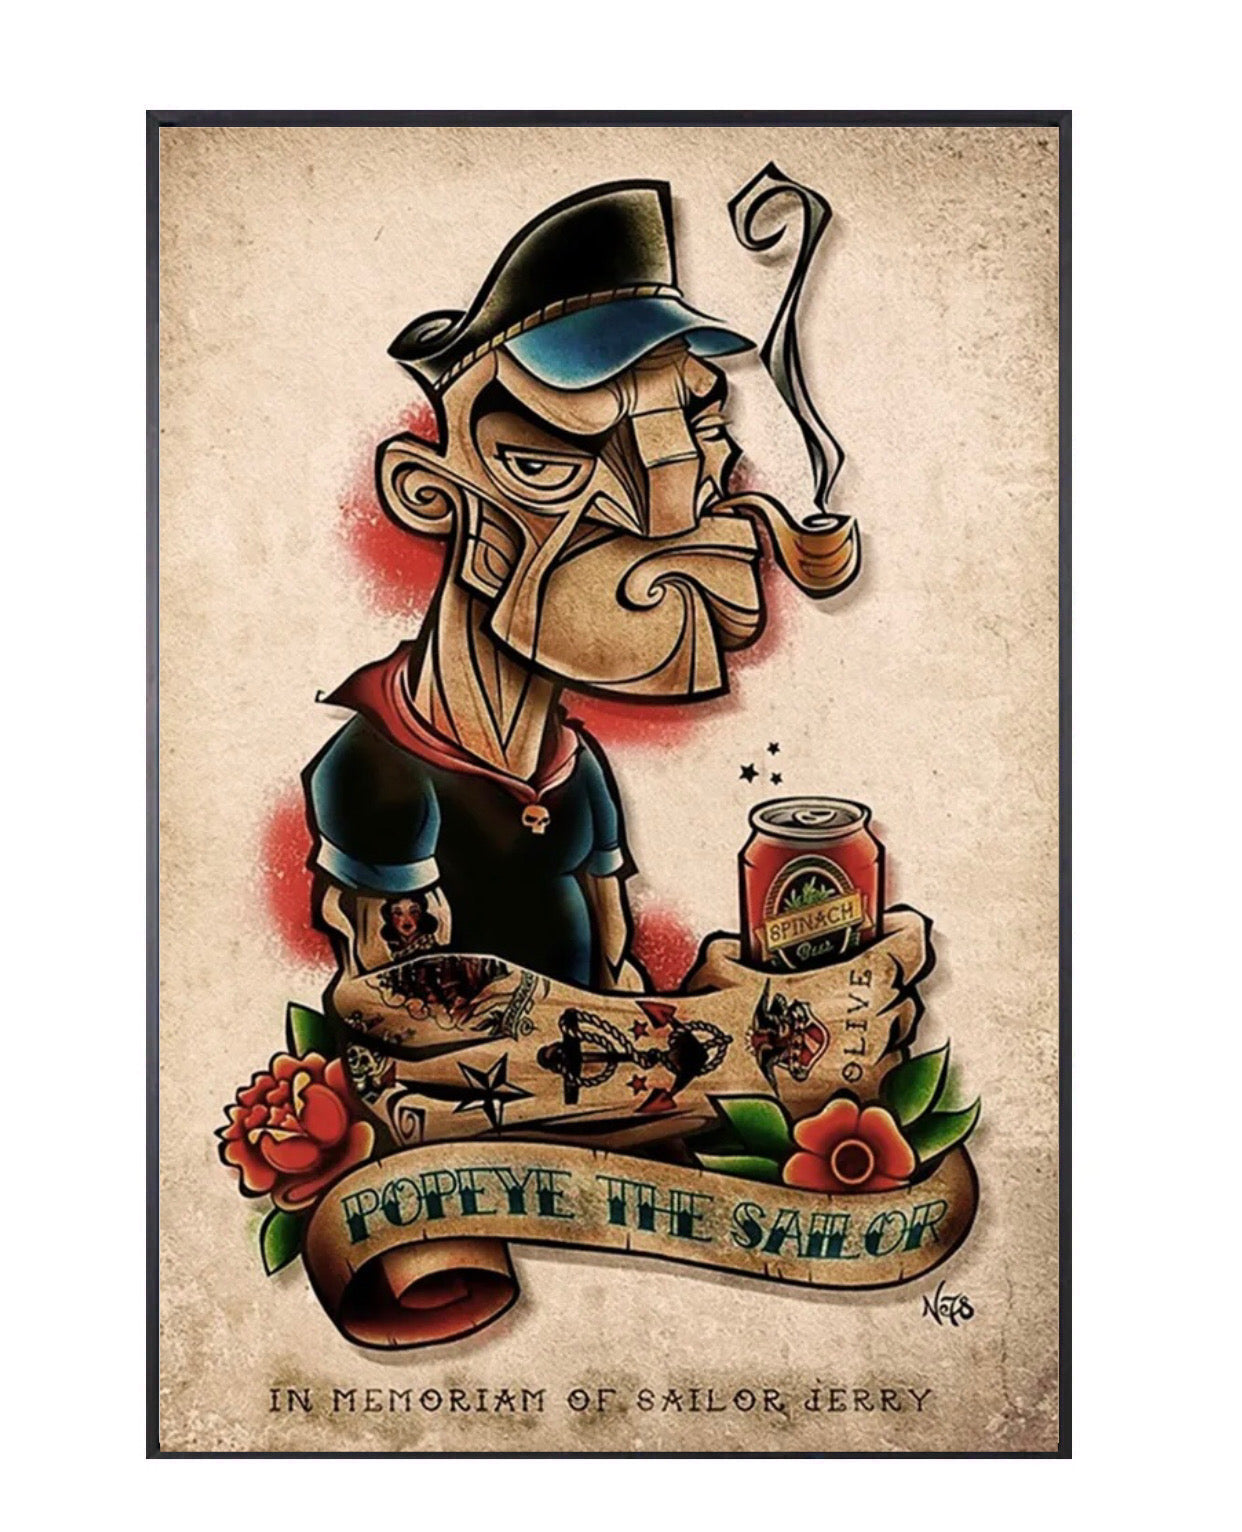 "popeye the sailor" tattoo poster